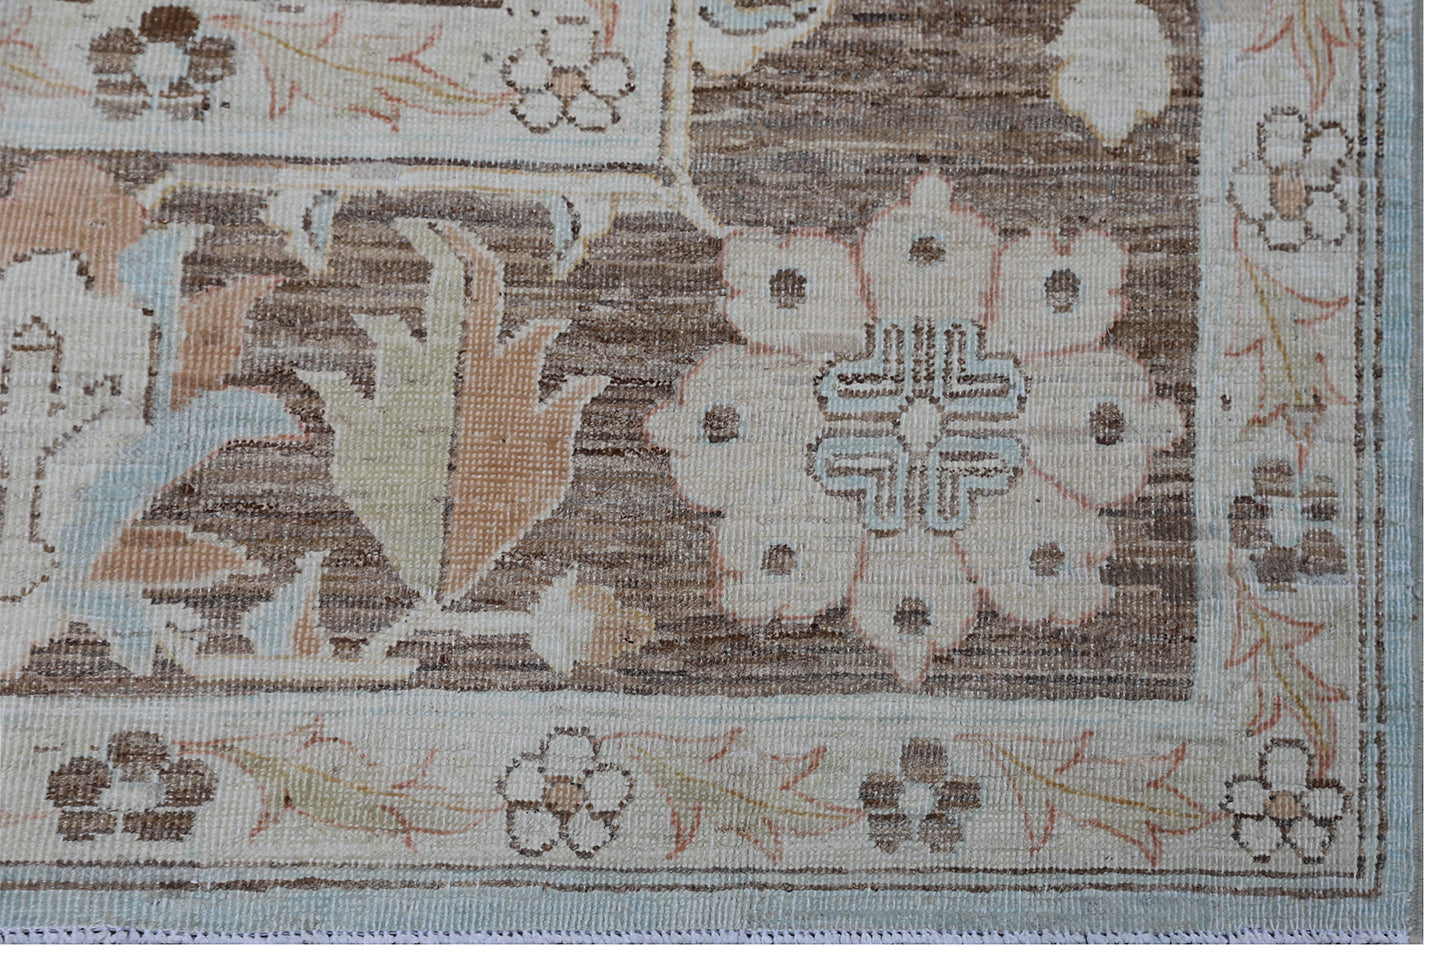 9'x12' Ariana Blue Brown Copper Sultanabad Floral Design Rug